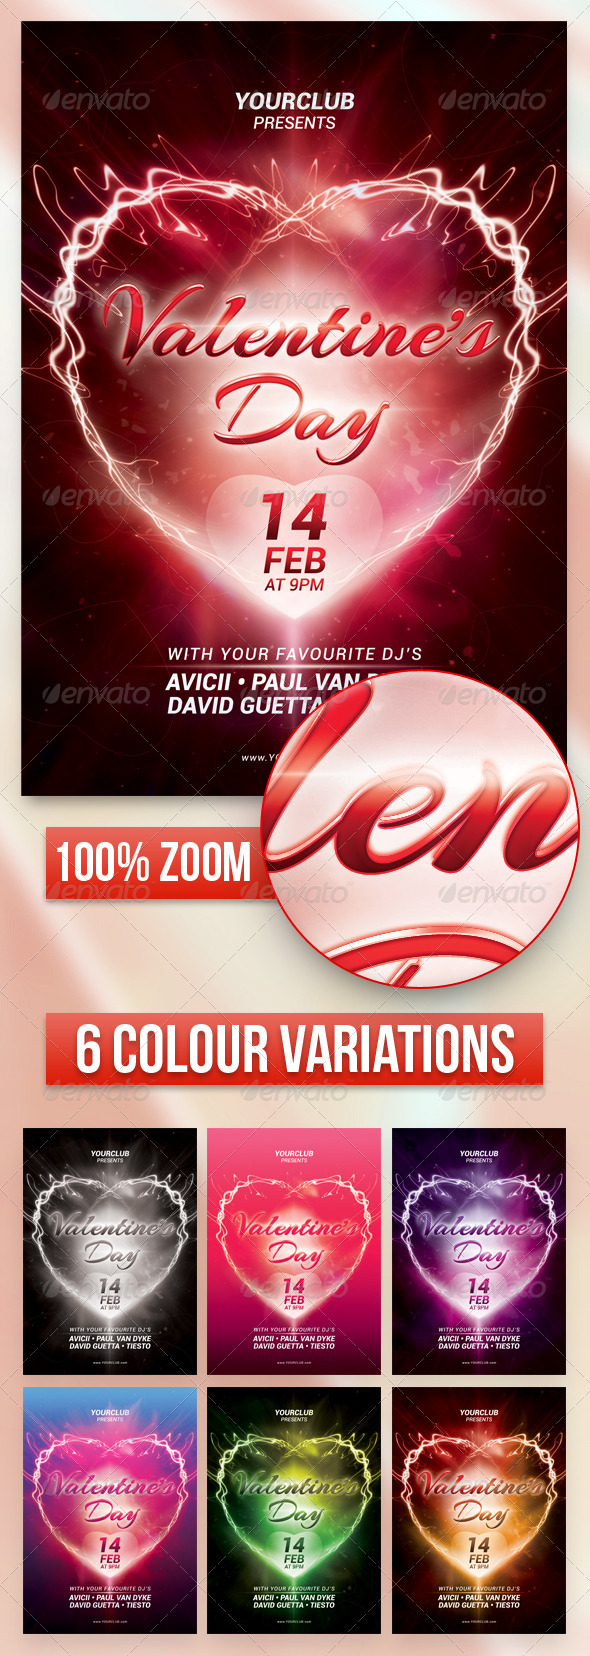 A5 Valentine's Day Party Flyer / Poster 7 in 1 (Events)